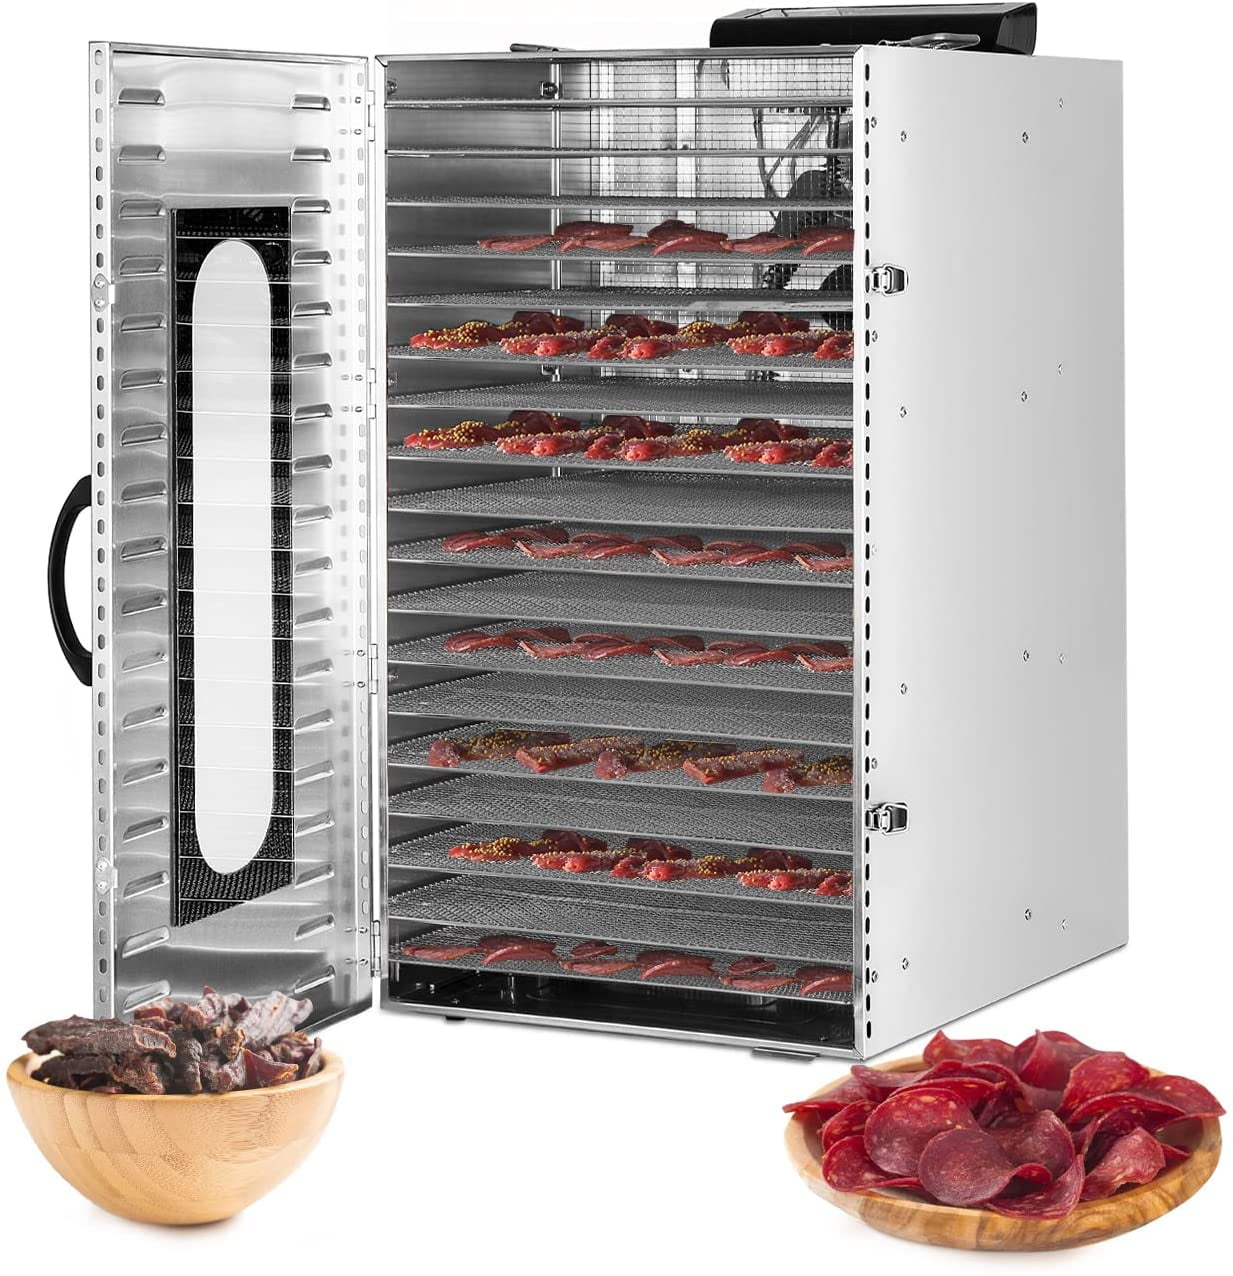 udvande Validering Tålmodighed YaptheS Commercial Stainless Steel Food Dehydrator for food and Jerky 1500W  20 Layers Food Dryer with Digital Adjustable Timer 0-2 - Walmart.com